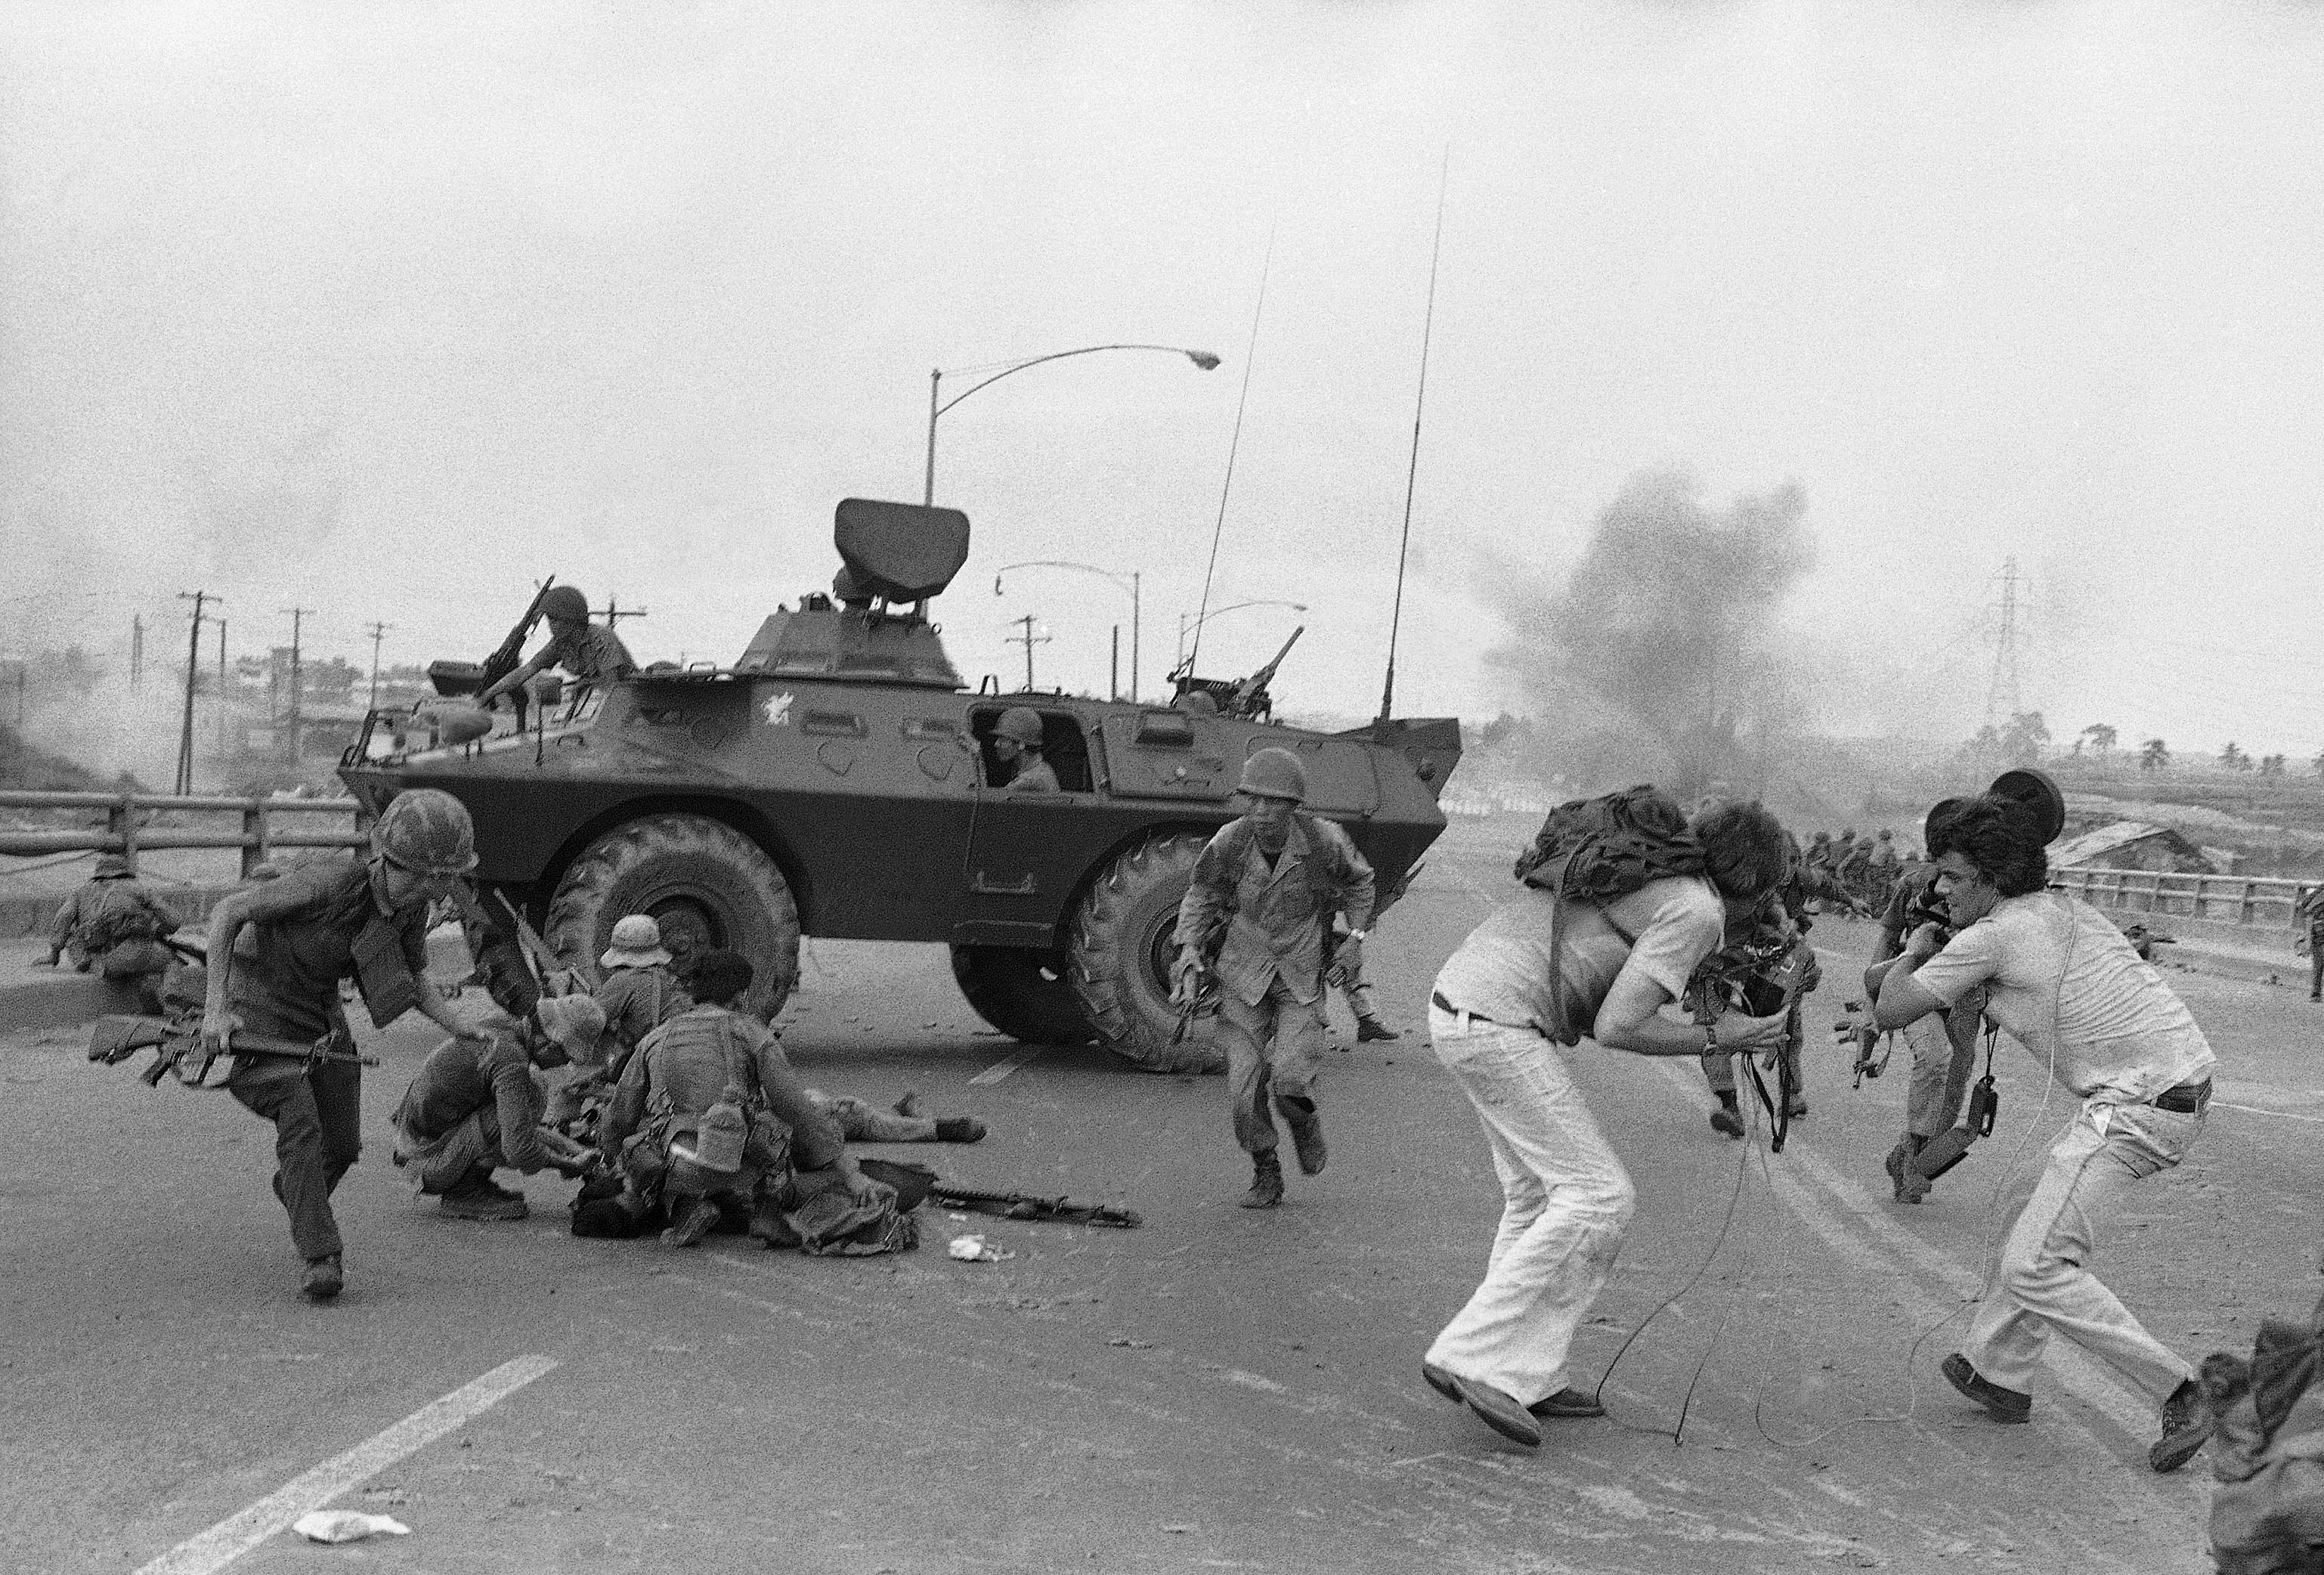 FILE - In this Monday, April 28, 1975 file photo, South Vietnamese troops and western TV newsmen run for cover as a North Vietnamese mortar round explodes on Newport Bridge on the outskirts of Saigon. (AP Photo/Hoanh, File)